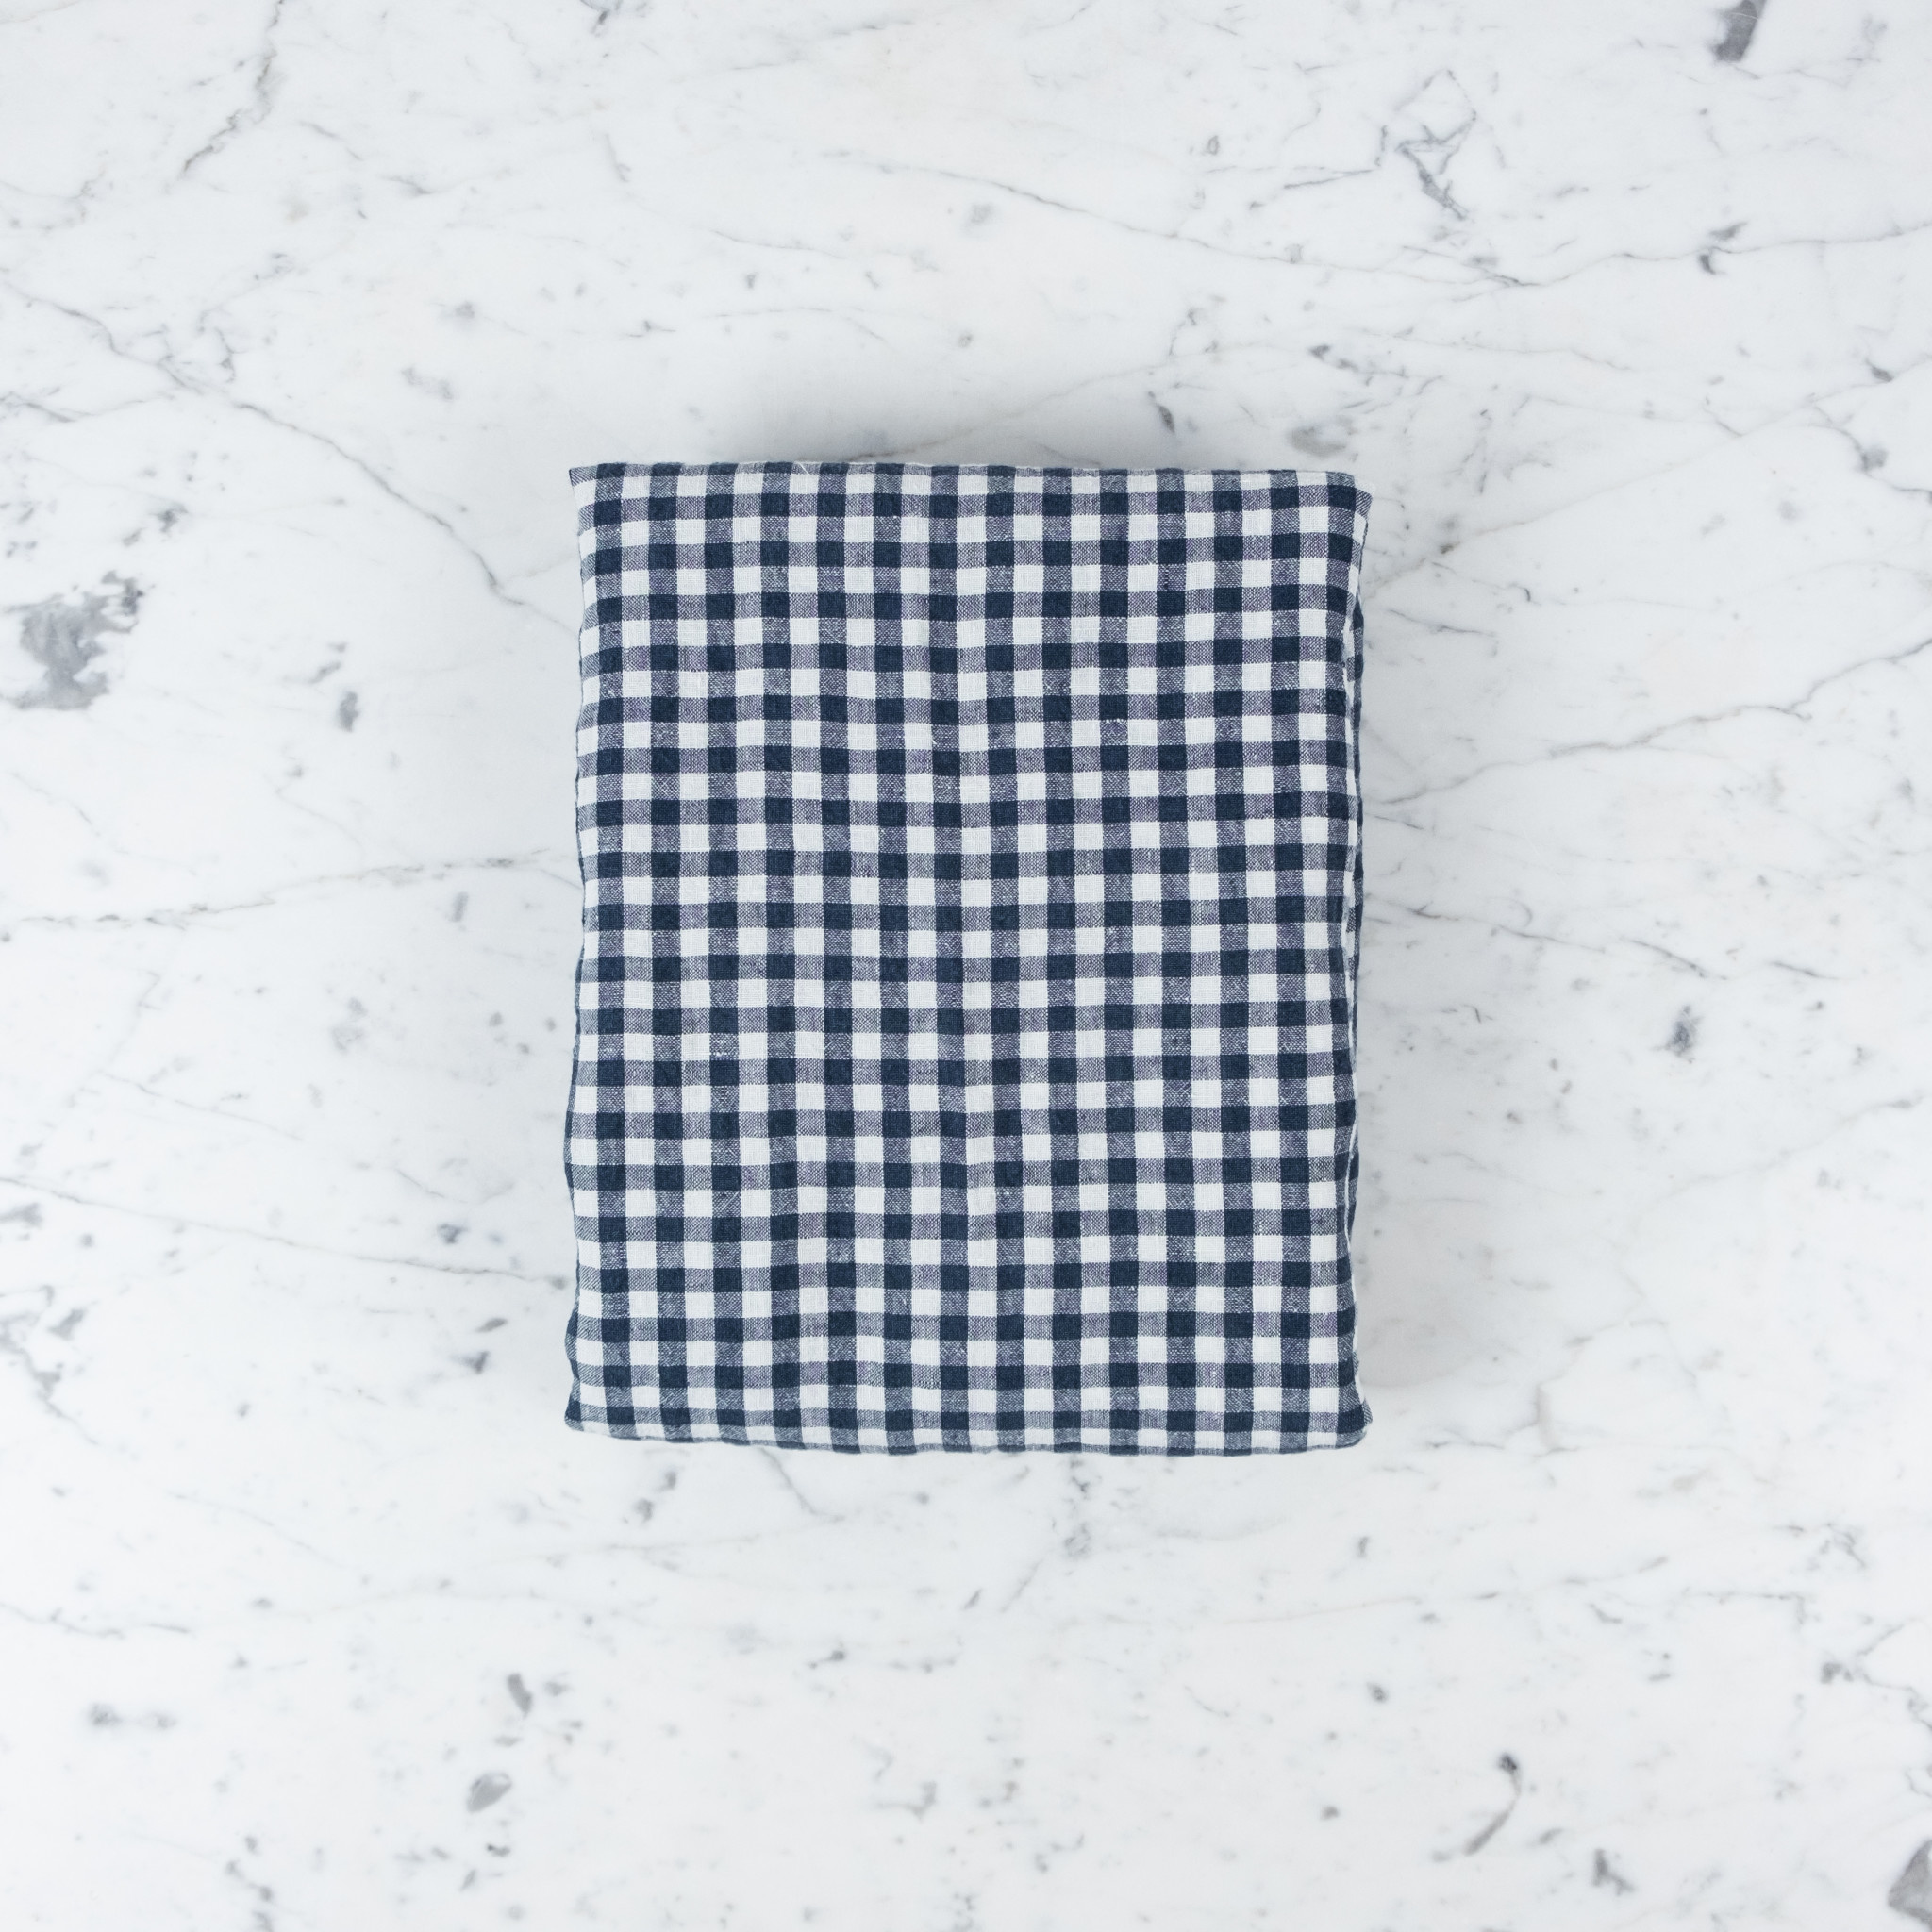 French Linen Pillow - Anthracite Grey Gingham